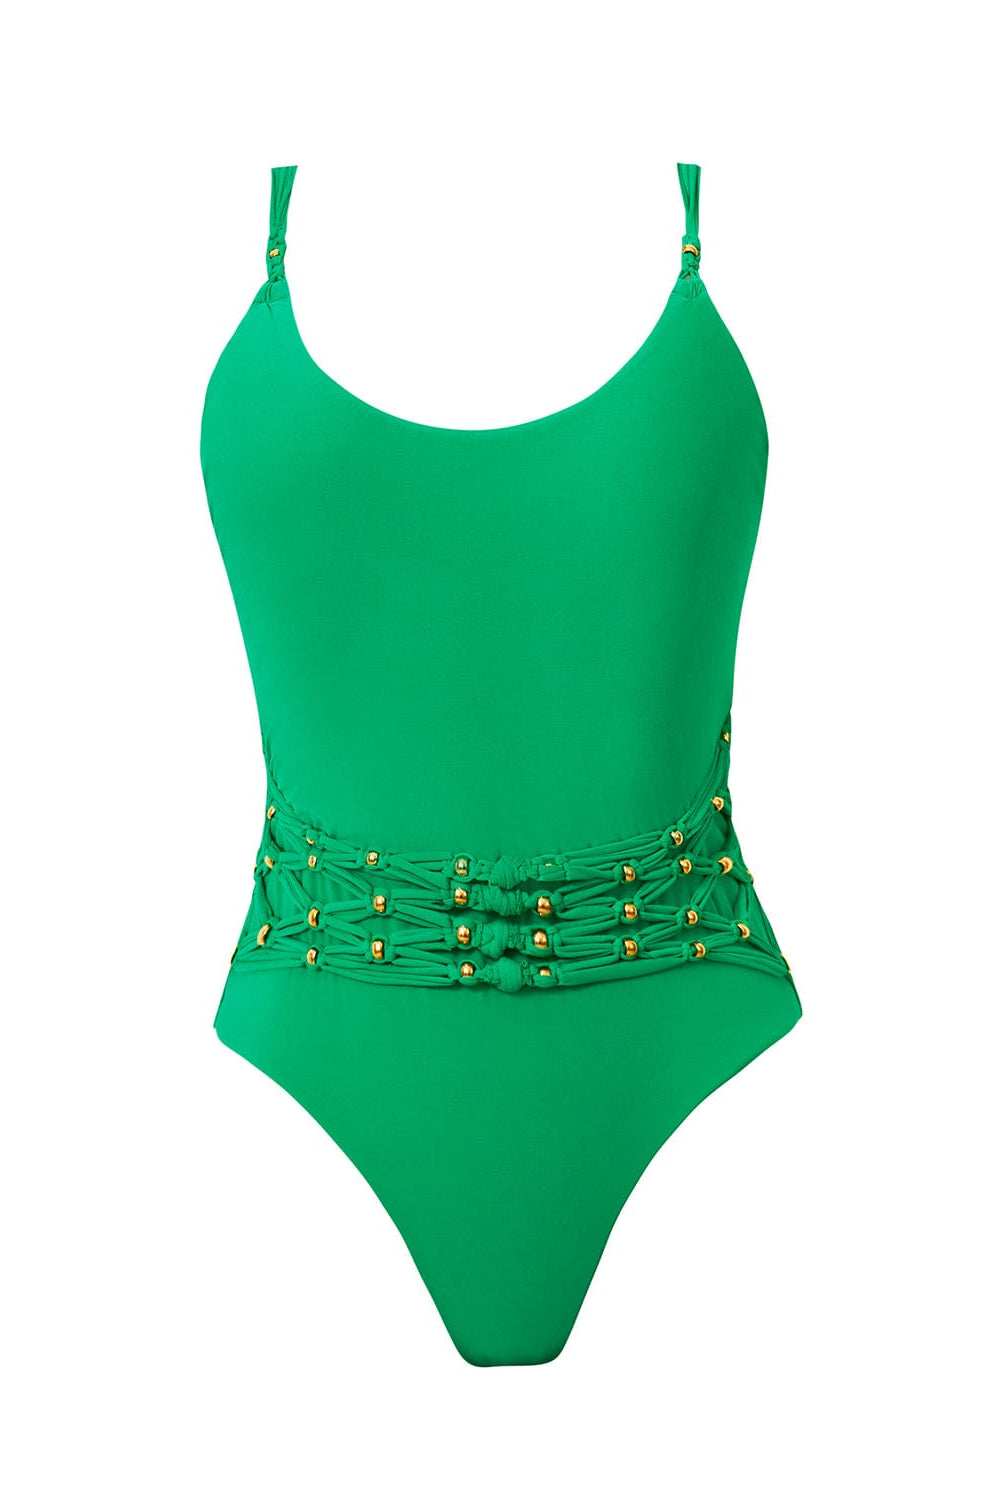 A green one piece swimsuit with gold beading. Featured against a white wall background.